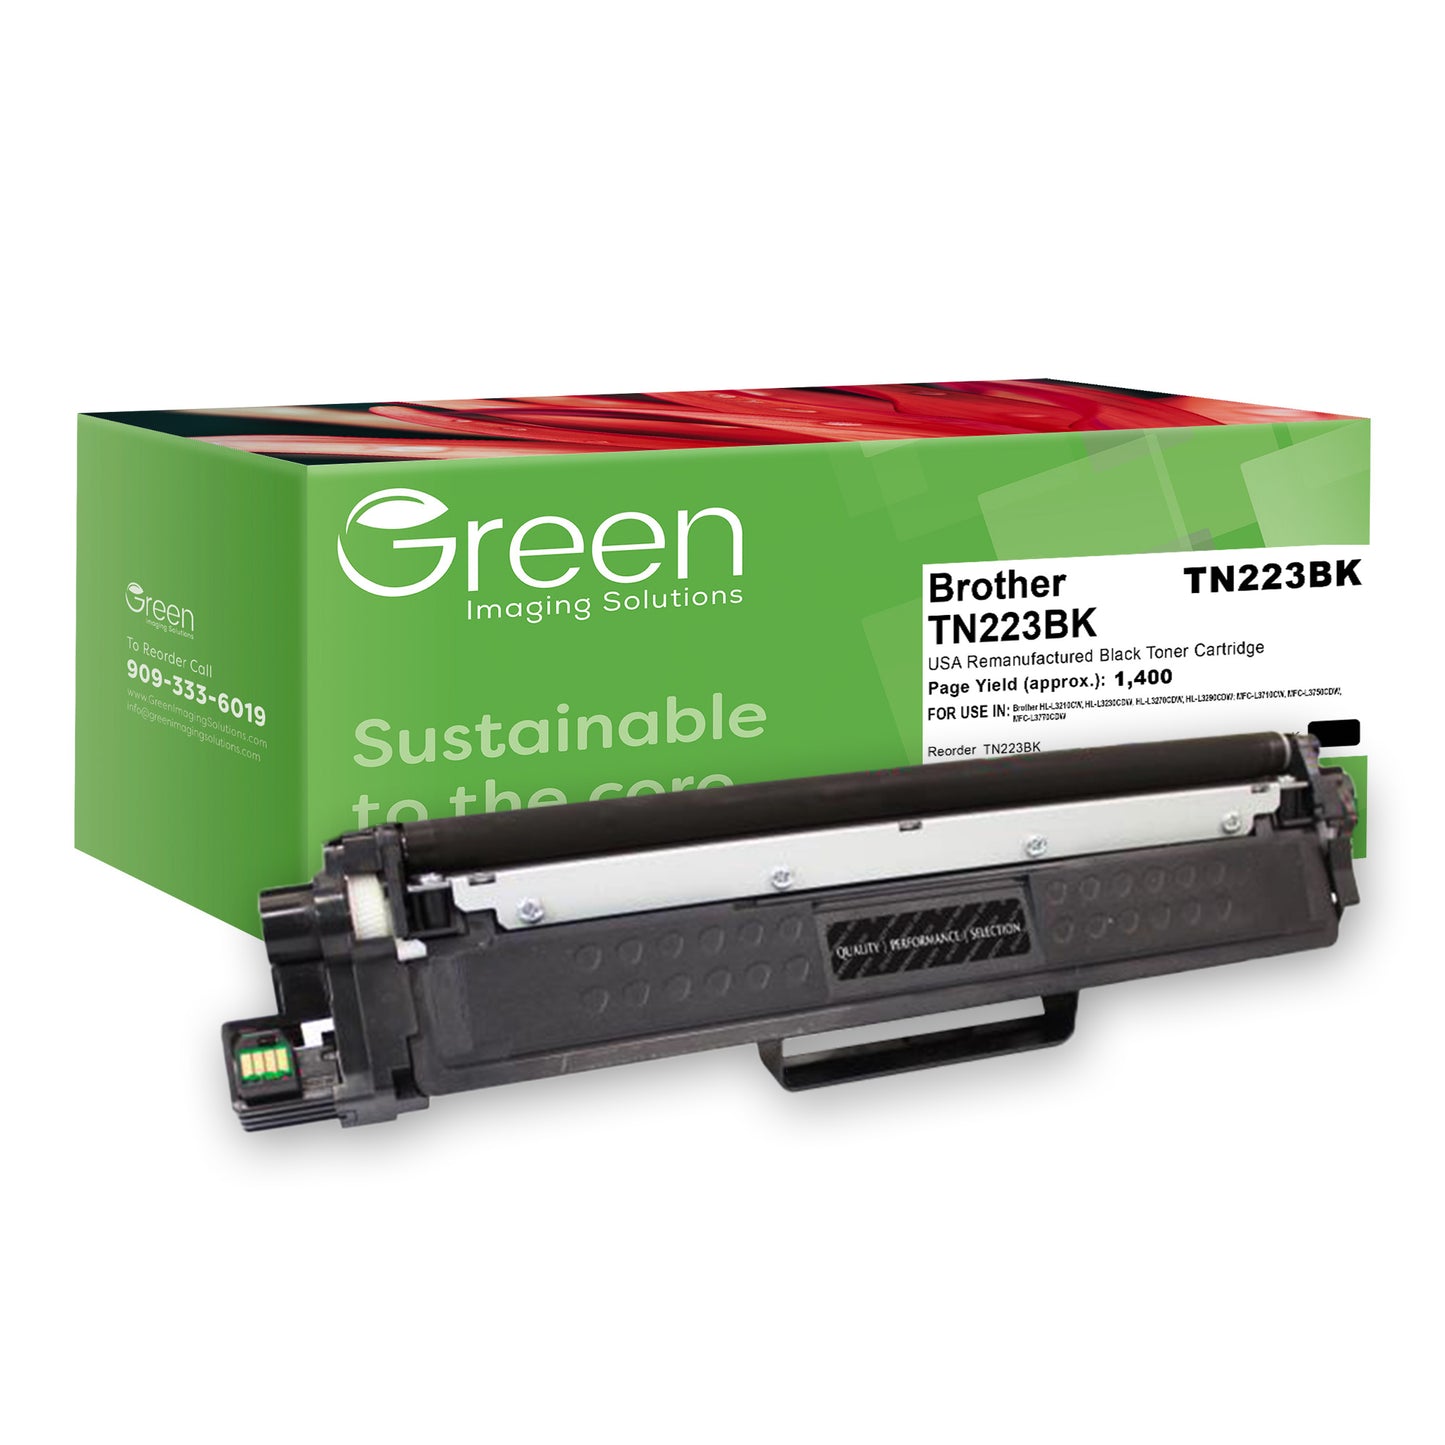 Green Imaging Solutions USA Remanufactured Black Toner Cartridge for Brother TN223